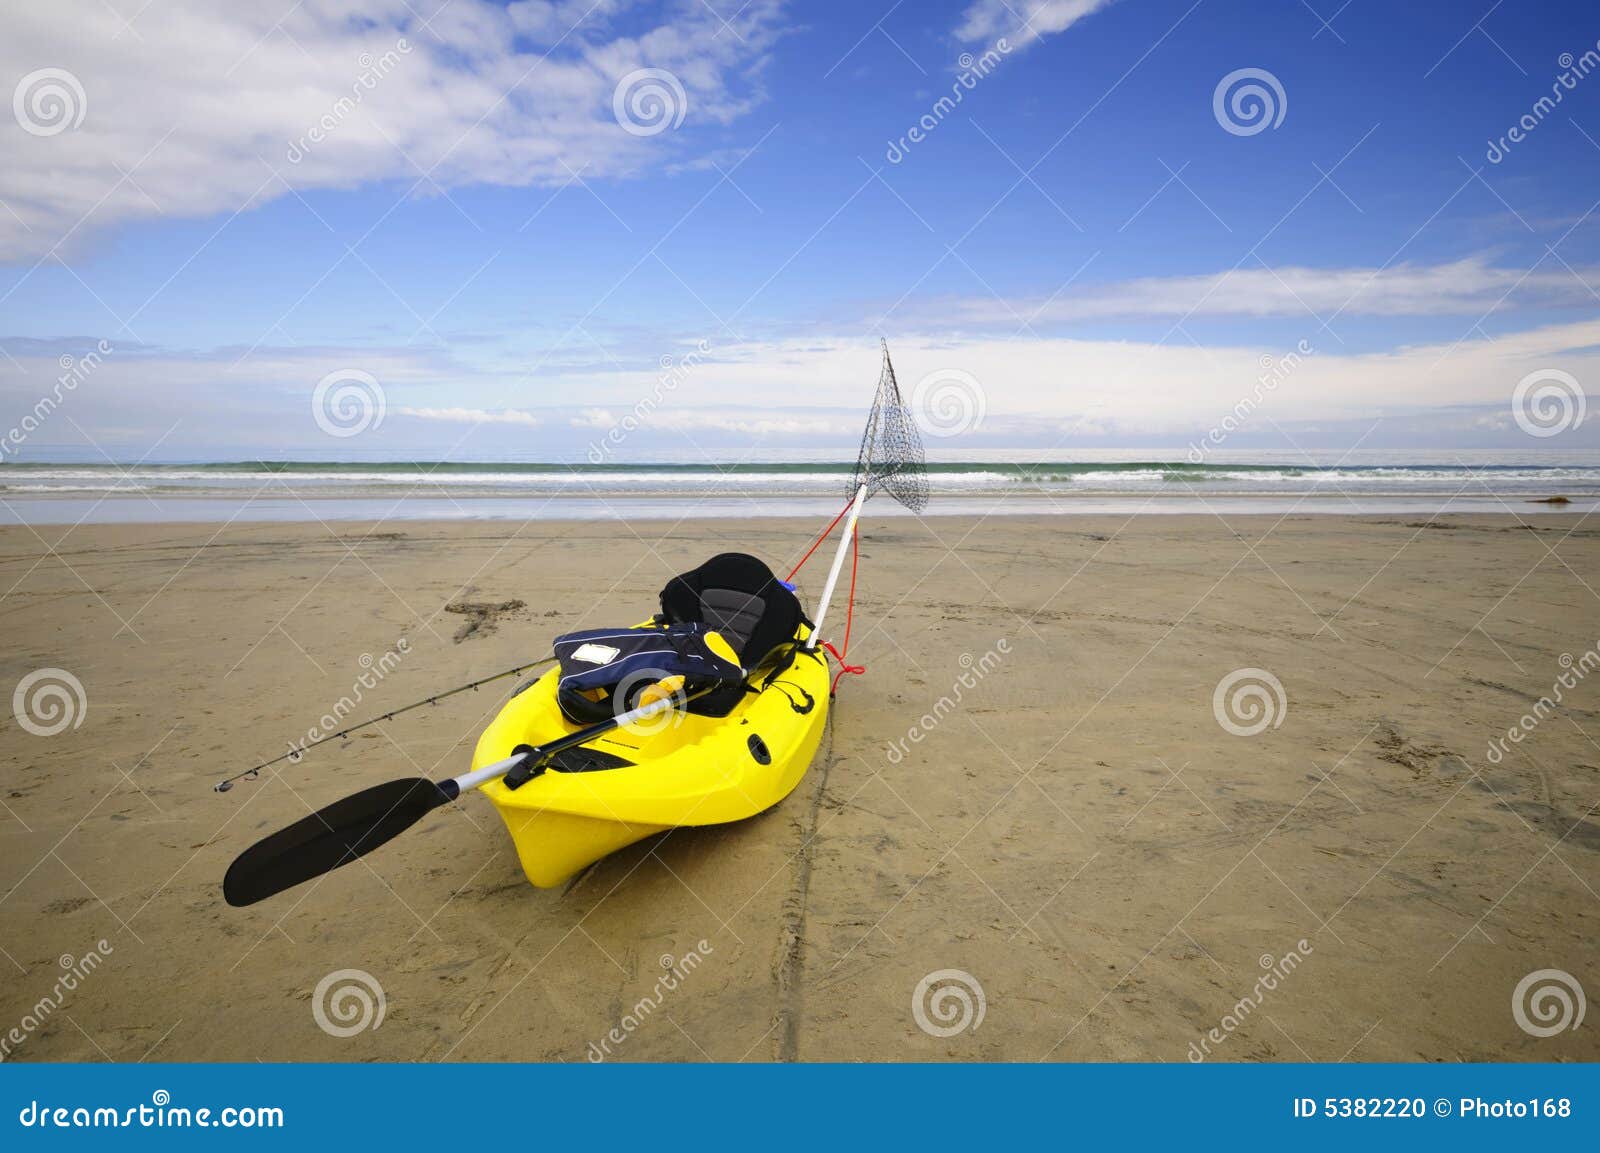 Kayak on the beach stock photo. Image of ocean, view, solitude - 5382220